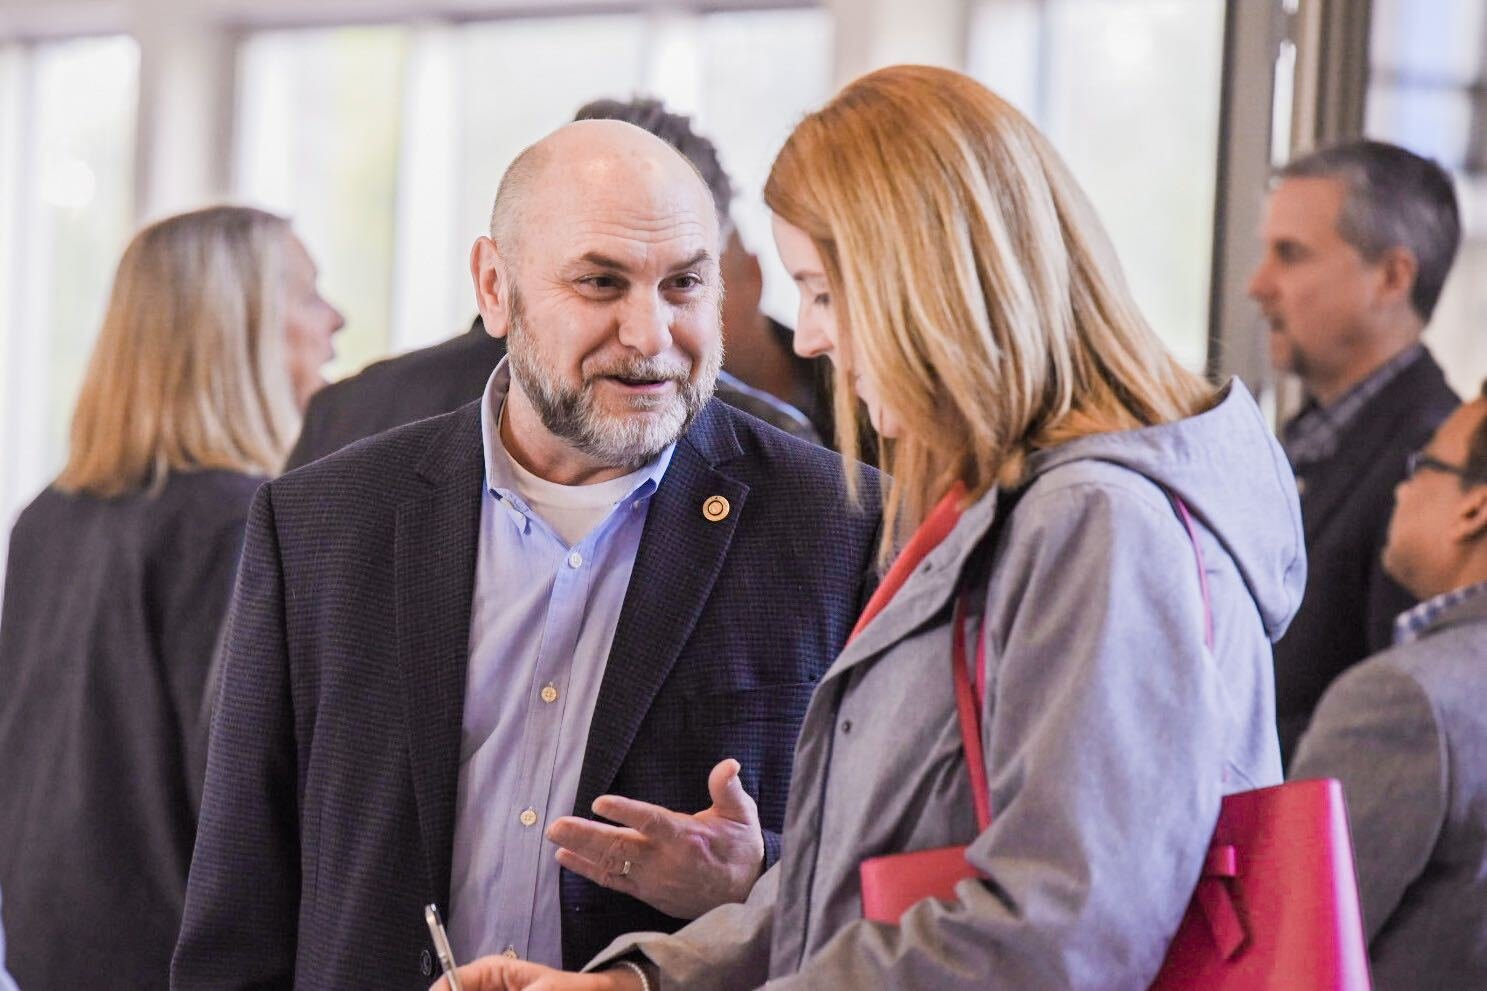 Todd Chaput, of the Economic Alliance of Lewis County, speaks to Centralia Mayor Kelly Smith Johnston during  a "Hydrogen Symposium" in the TransAlta Commons at Centralia College on Thursday.